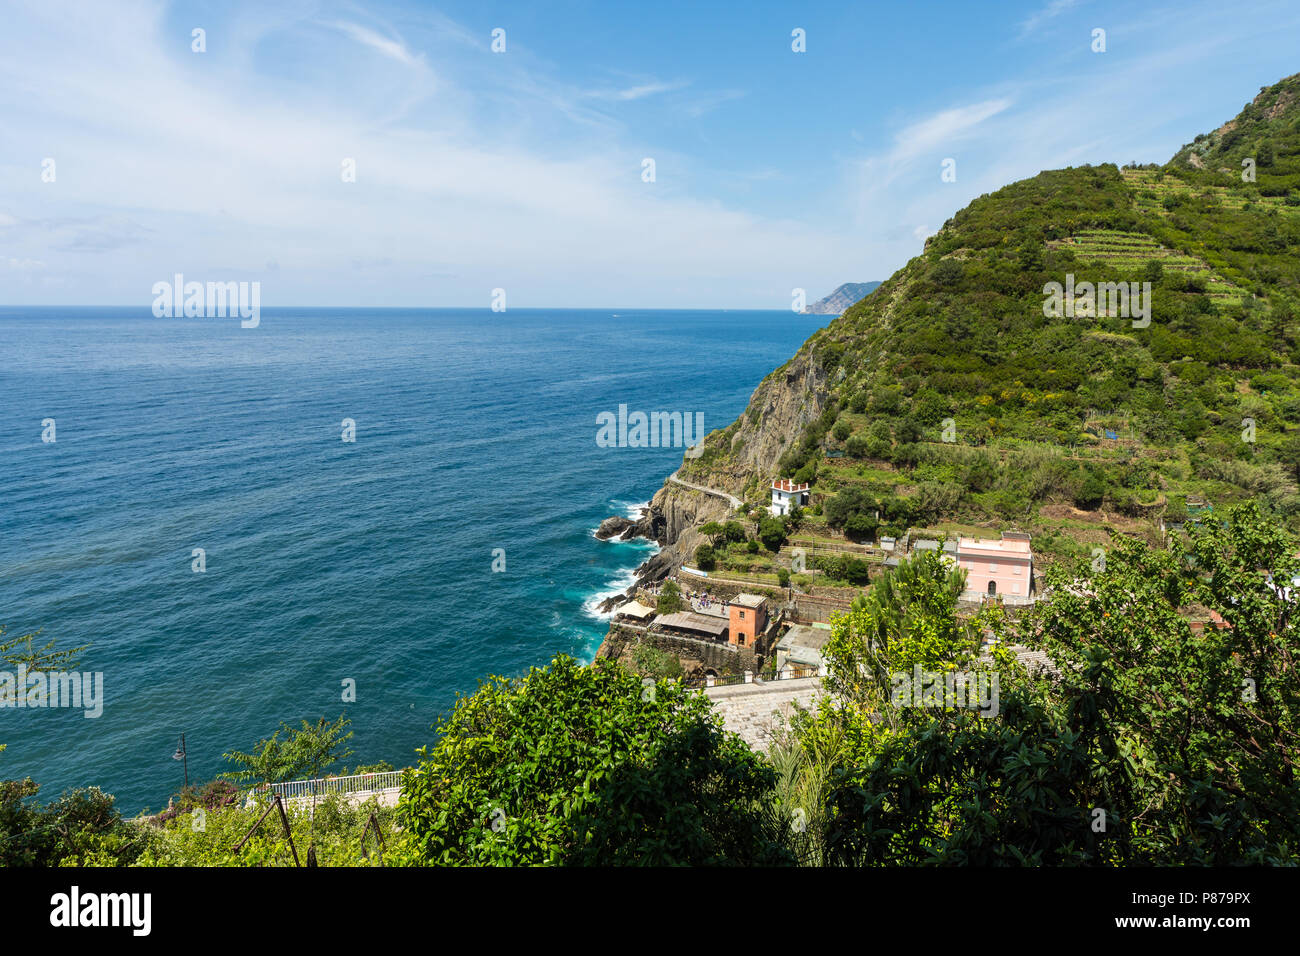 The Cinque Terre National Park is a protected area inducted as Italy's first national park in 1999. Located in the province of La Spezia, Liguria. Stock Photo